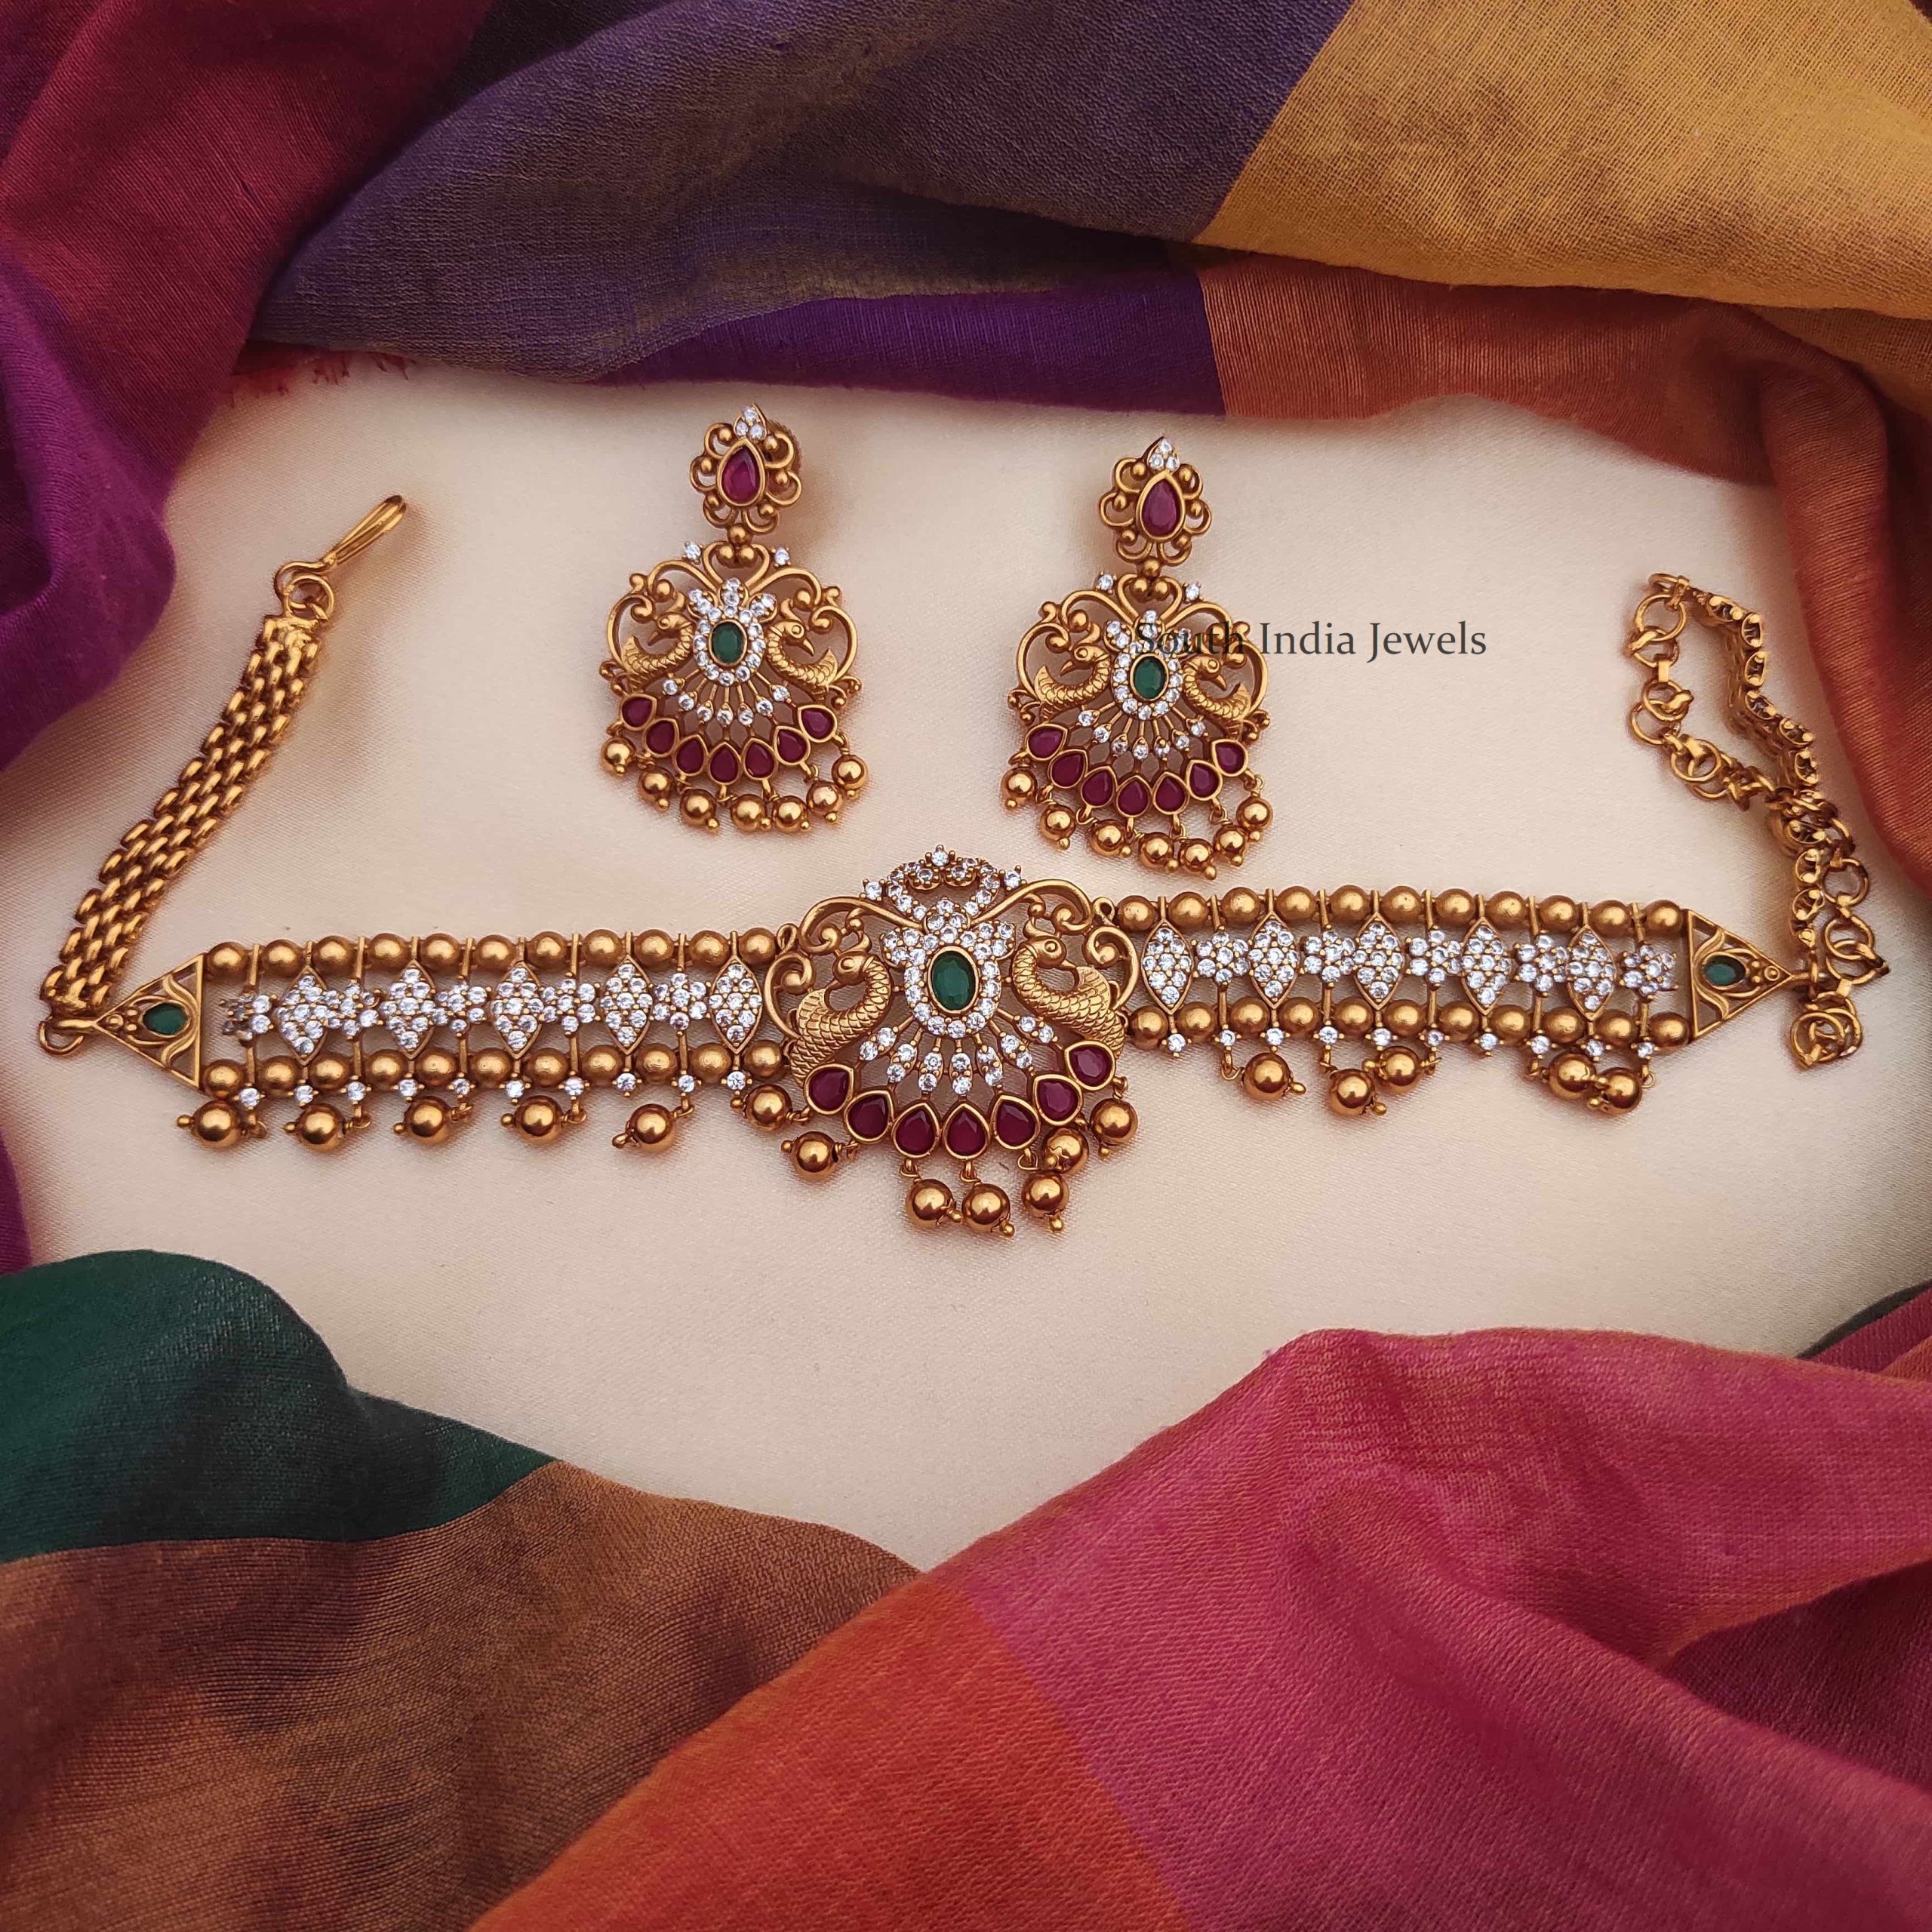 CZ Stone Choker with Earrings - South India Jewels